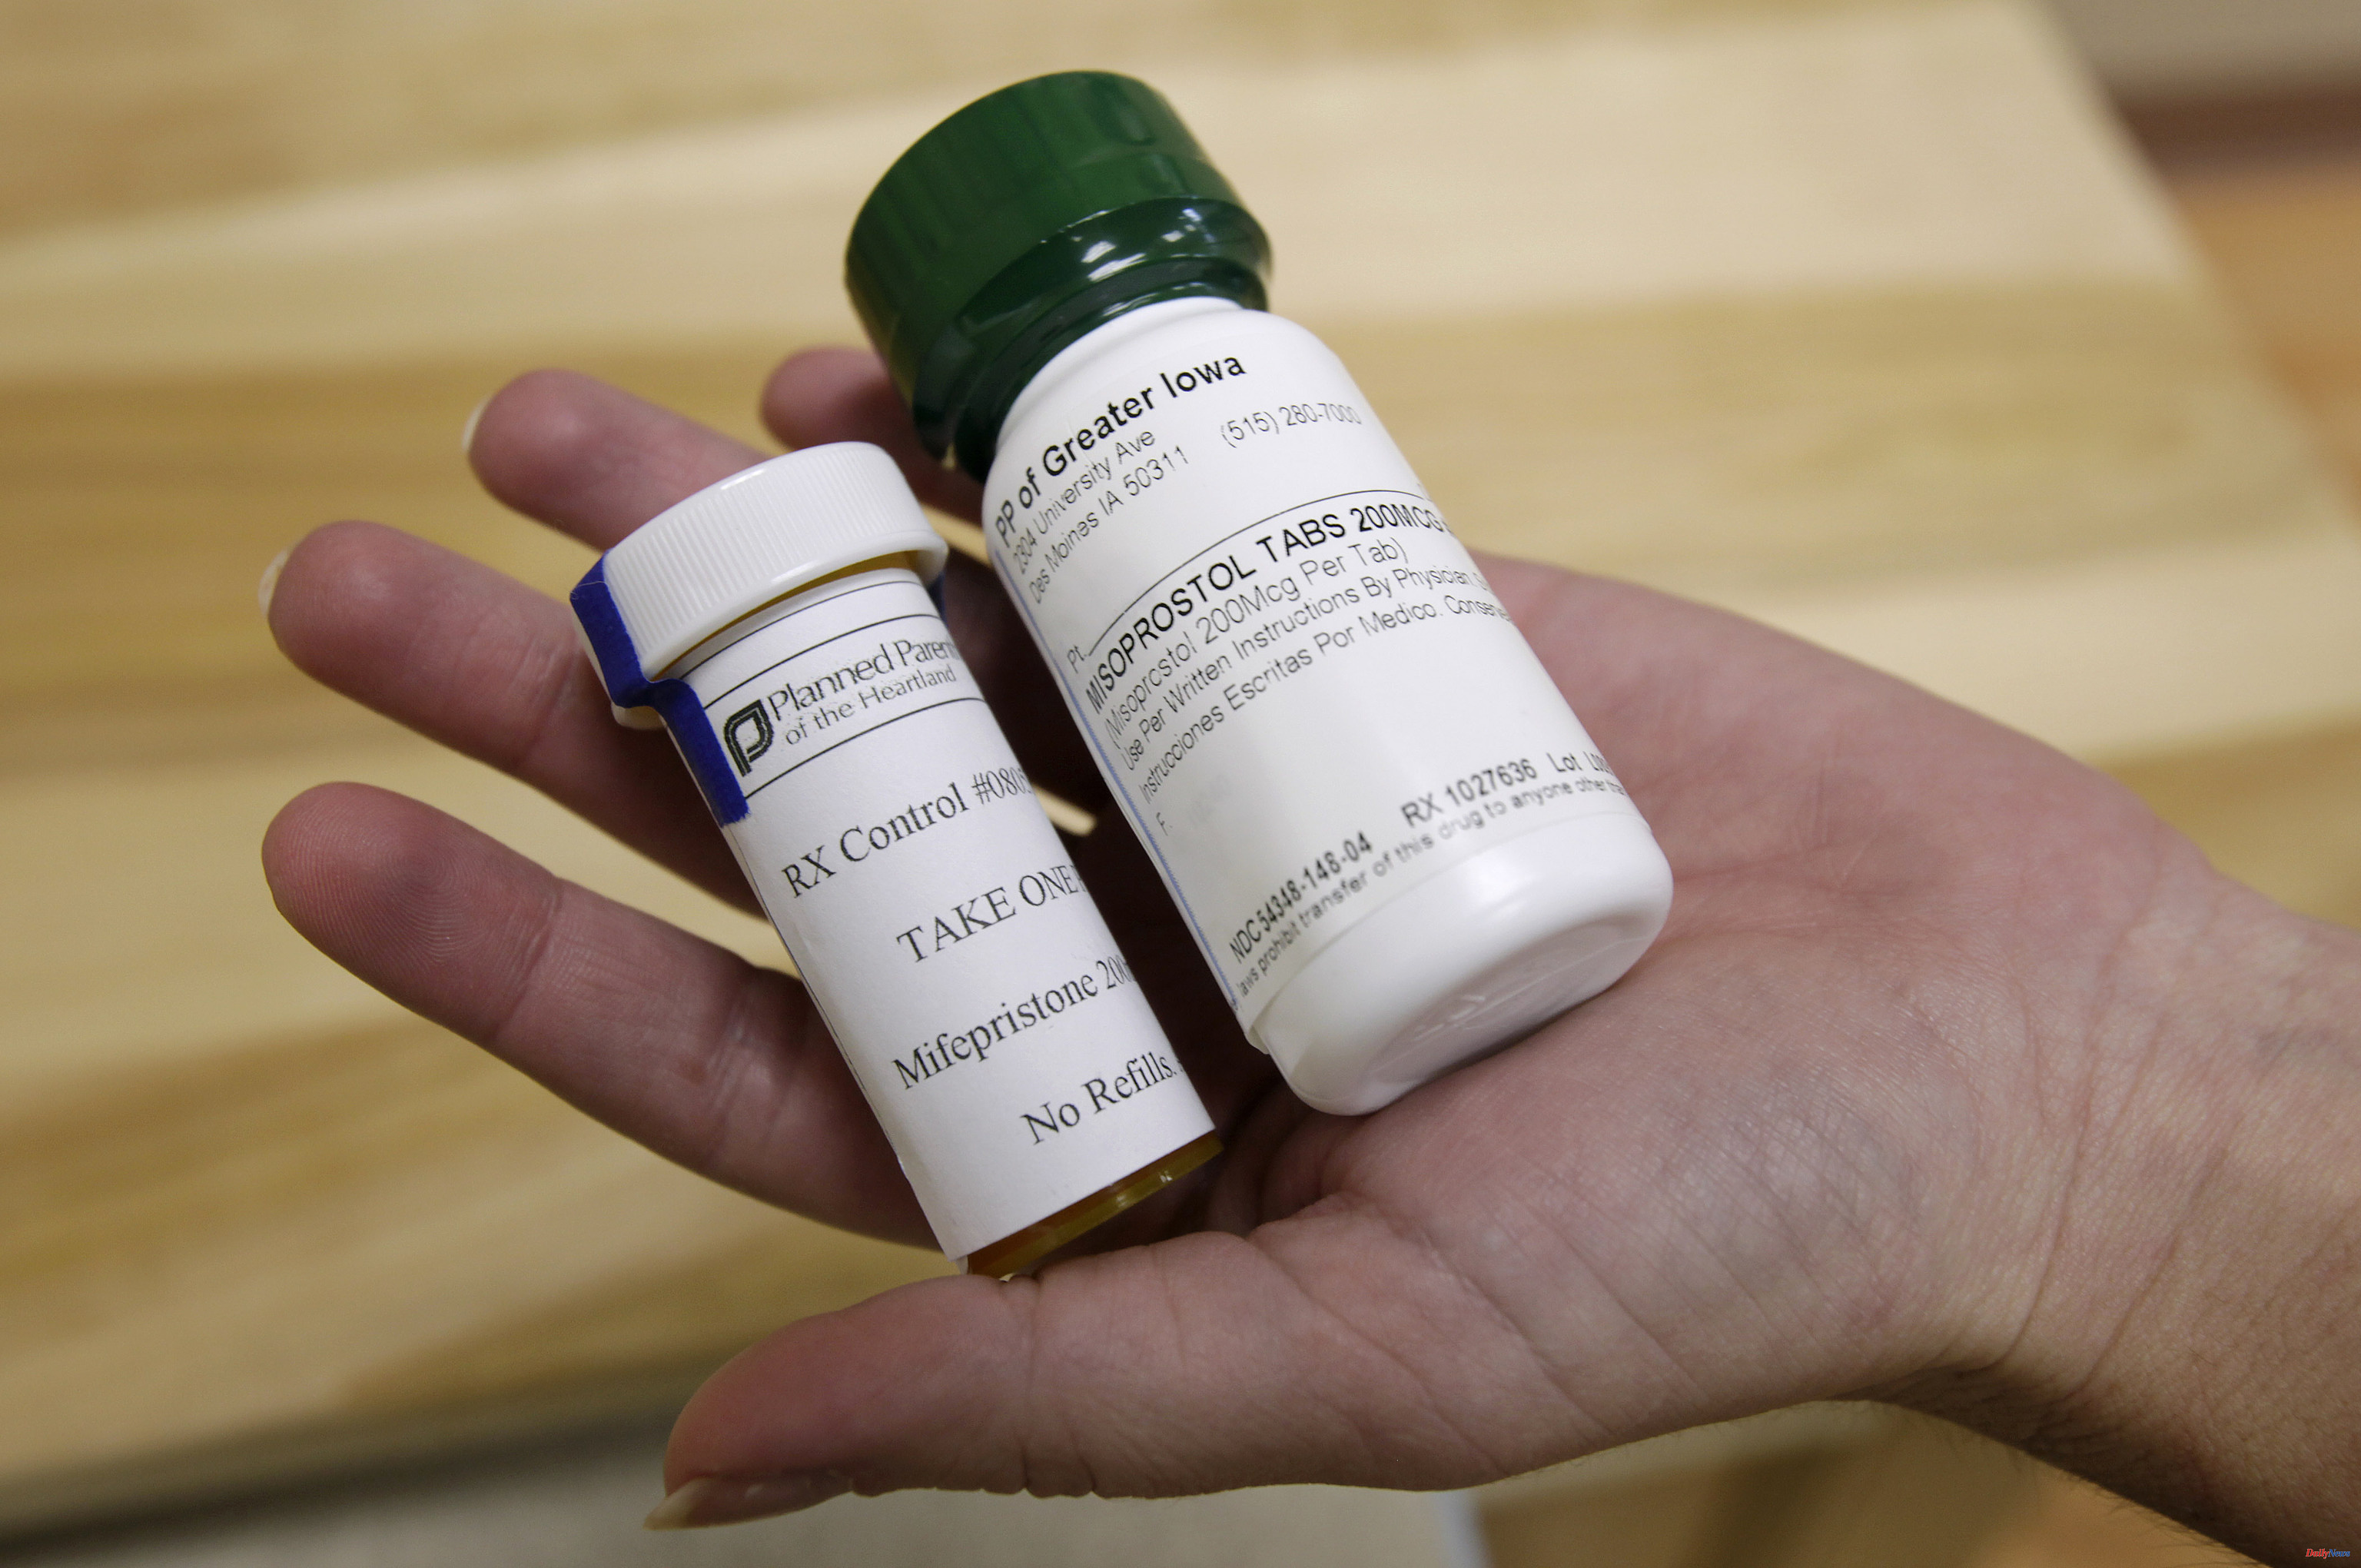 America A US court temporarily authorizes the abortion pill under stricter rules